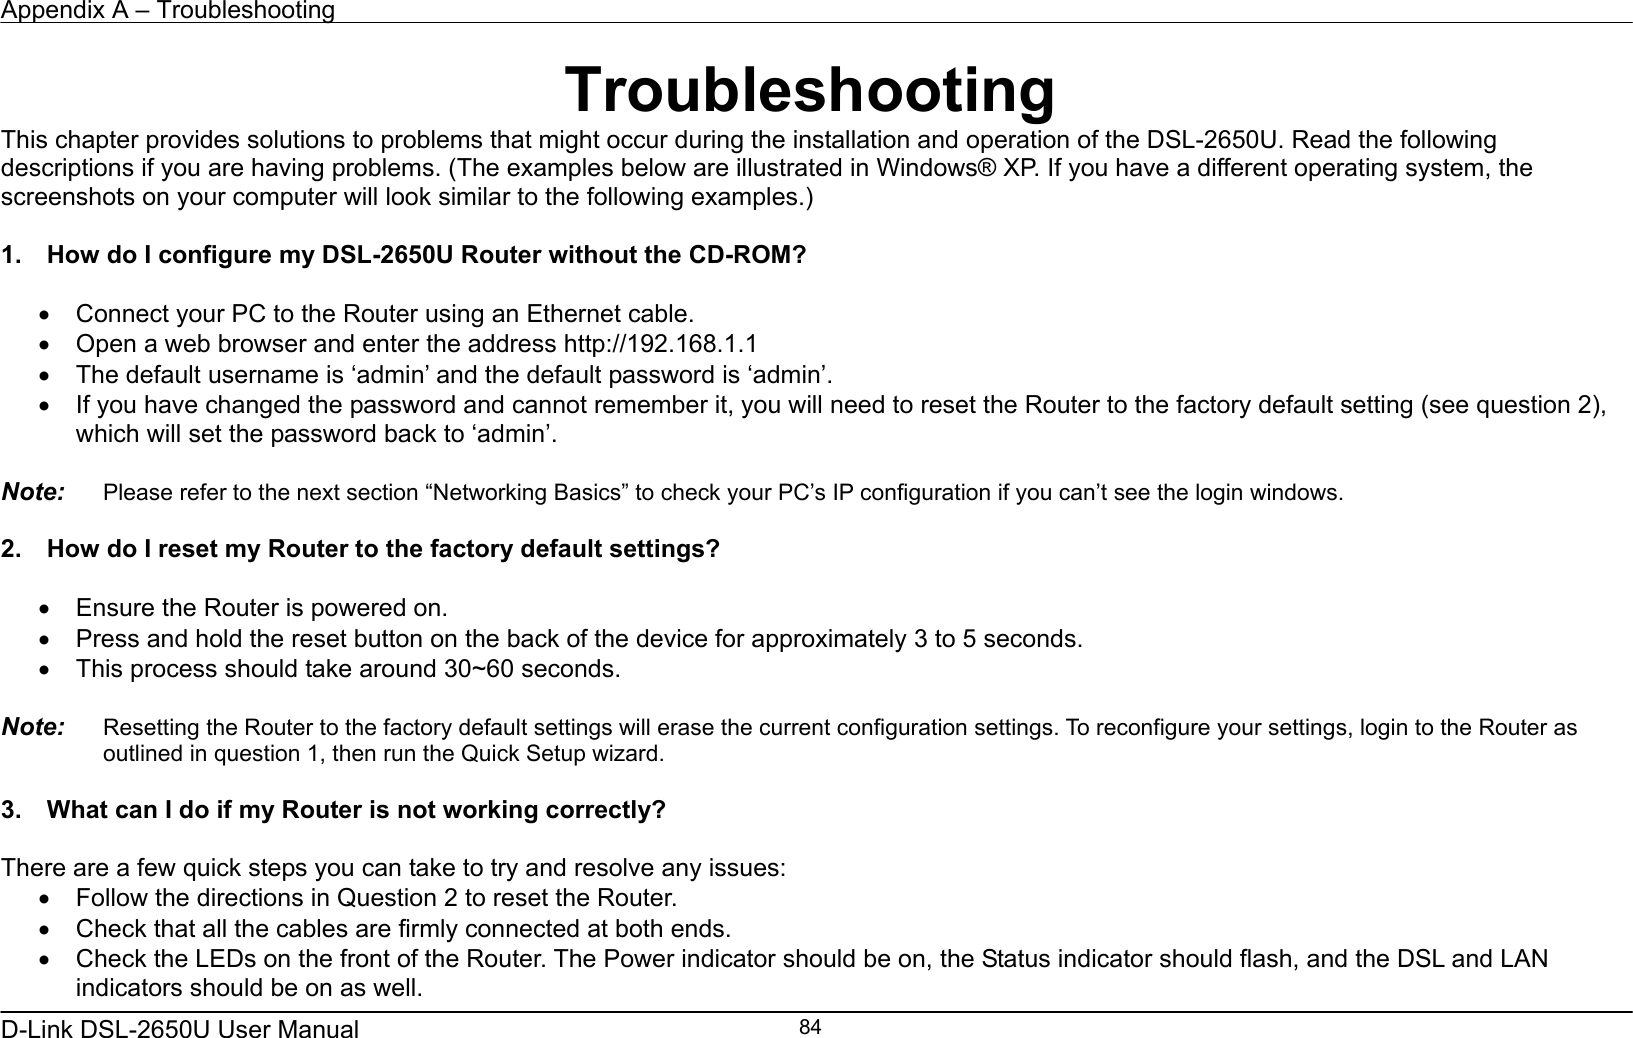 Appendix A – Troubleshooting   D-Link DSL-2650U User Manual    84Troubleshooting This chapter provides solutions to problems that might occur during the installation and operation of the DSL-2650U. Read the following descriptions if you are having problems. (The examples below are illustrated in Windows® XP. If you have a different operating system, the screenshots on your computer will look similar to the following examples.)  1.    How do I configure my DSL-2650U Router without the CD-ROM?  •  Connect your PC to the Router using an Ethernet cable. •  Open a web browser and enter the address http://192.168.1.1 •  The default username is ‘admin’ and the default password is ‘admin’. •  If you have changed the password and cannot remember it, you will need to reset the Router to the factory default setting (see question 2), which will set the password back to ‘admin’.  Note:   Please refer to the next section “Networking Basics” to check your PC’s IP configuration if you can’t see the login windows.  2.    How do I reset my Router to the factory default settings?  •  Ensure the Router is powered on. •  Press and hold the reset button on the back of the device for approximately 3 to 5 seconds. •  This process should take around 30~60 seconds.    Note:   Resetting the Router to the factory default settings will erase the current configuration settings. To reconfigure your settings, login to the Router as outlined in question 1, then run the Quick Setup wizard.  3.    What can I do if my Router is not working correctly?  There are a few quick steps you can take to try and resolve any issues: •  Follow the directions in Question 2 to reset the Router. •  Check that all the cables are firmly connected at both ends. •  Check the LEDs on the front of the Router. The Power indicator should be on, the Status indicator should flash, and the DSL and LAN indicators should be on as well. 